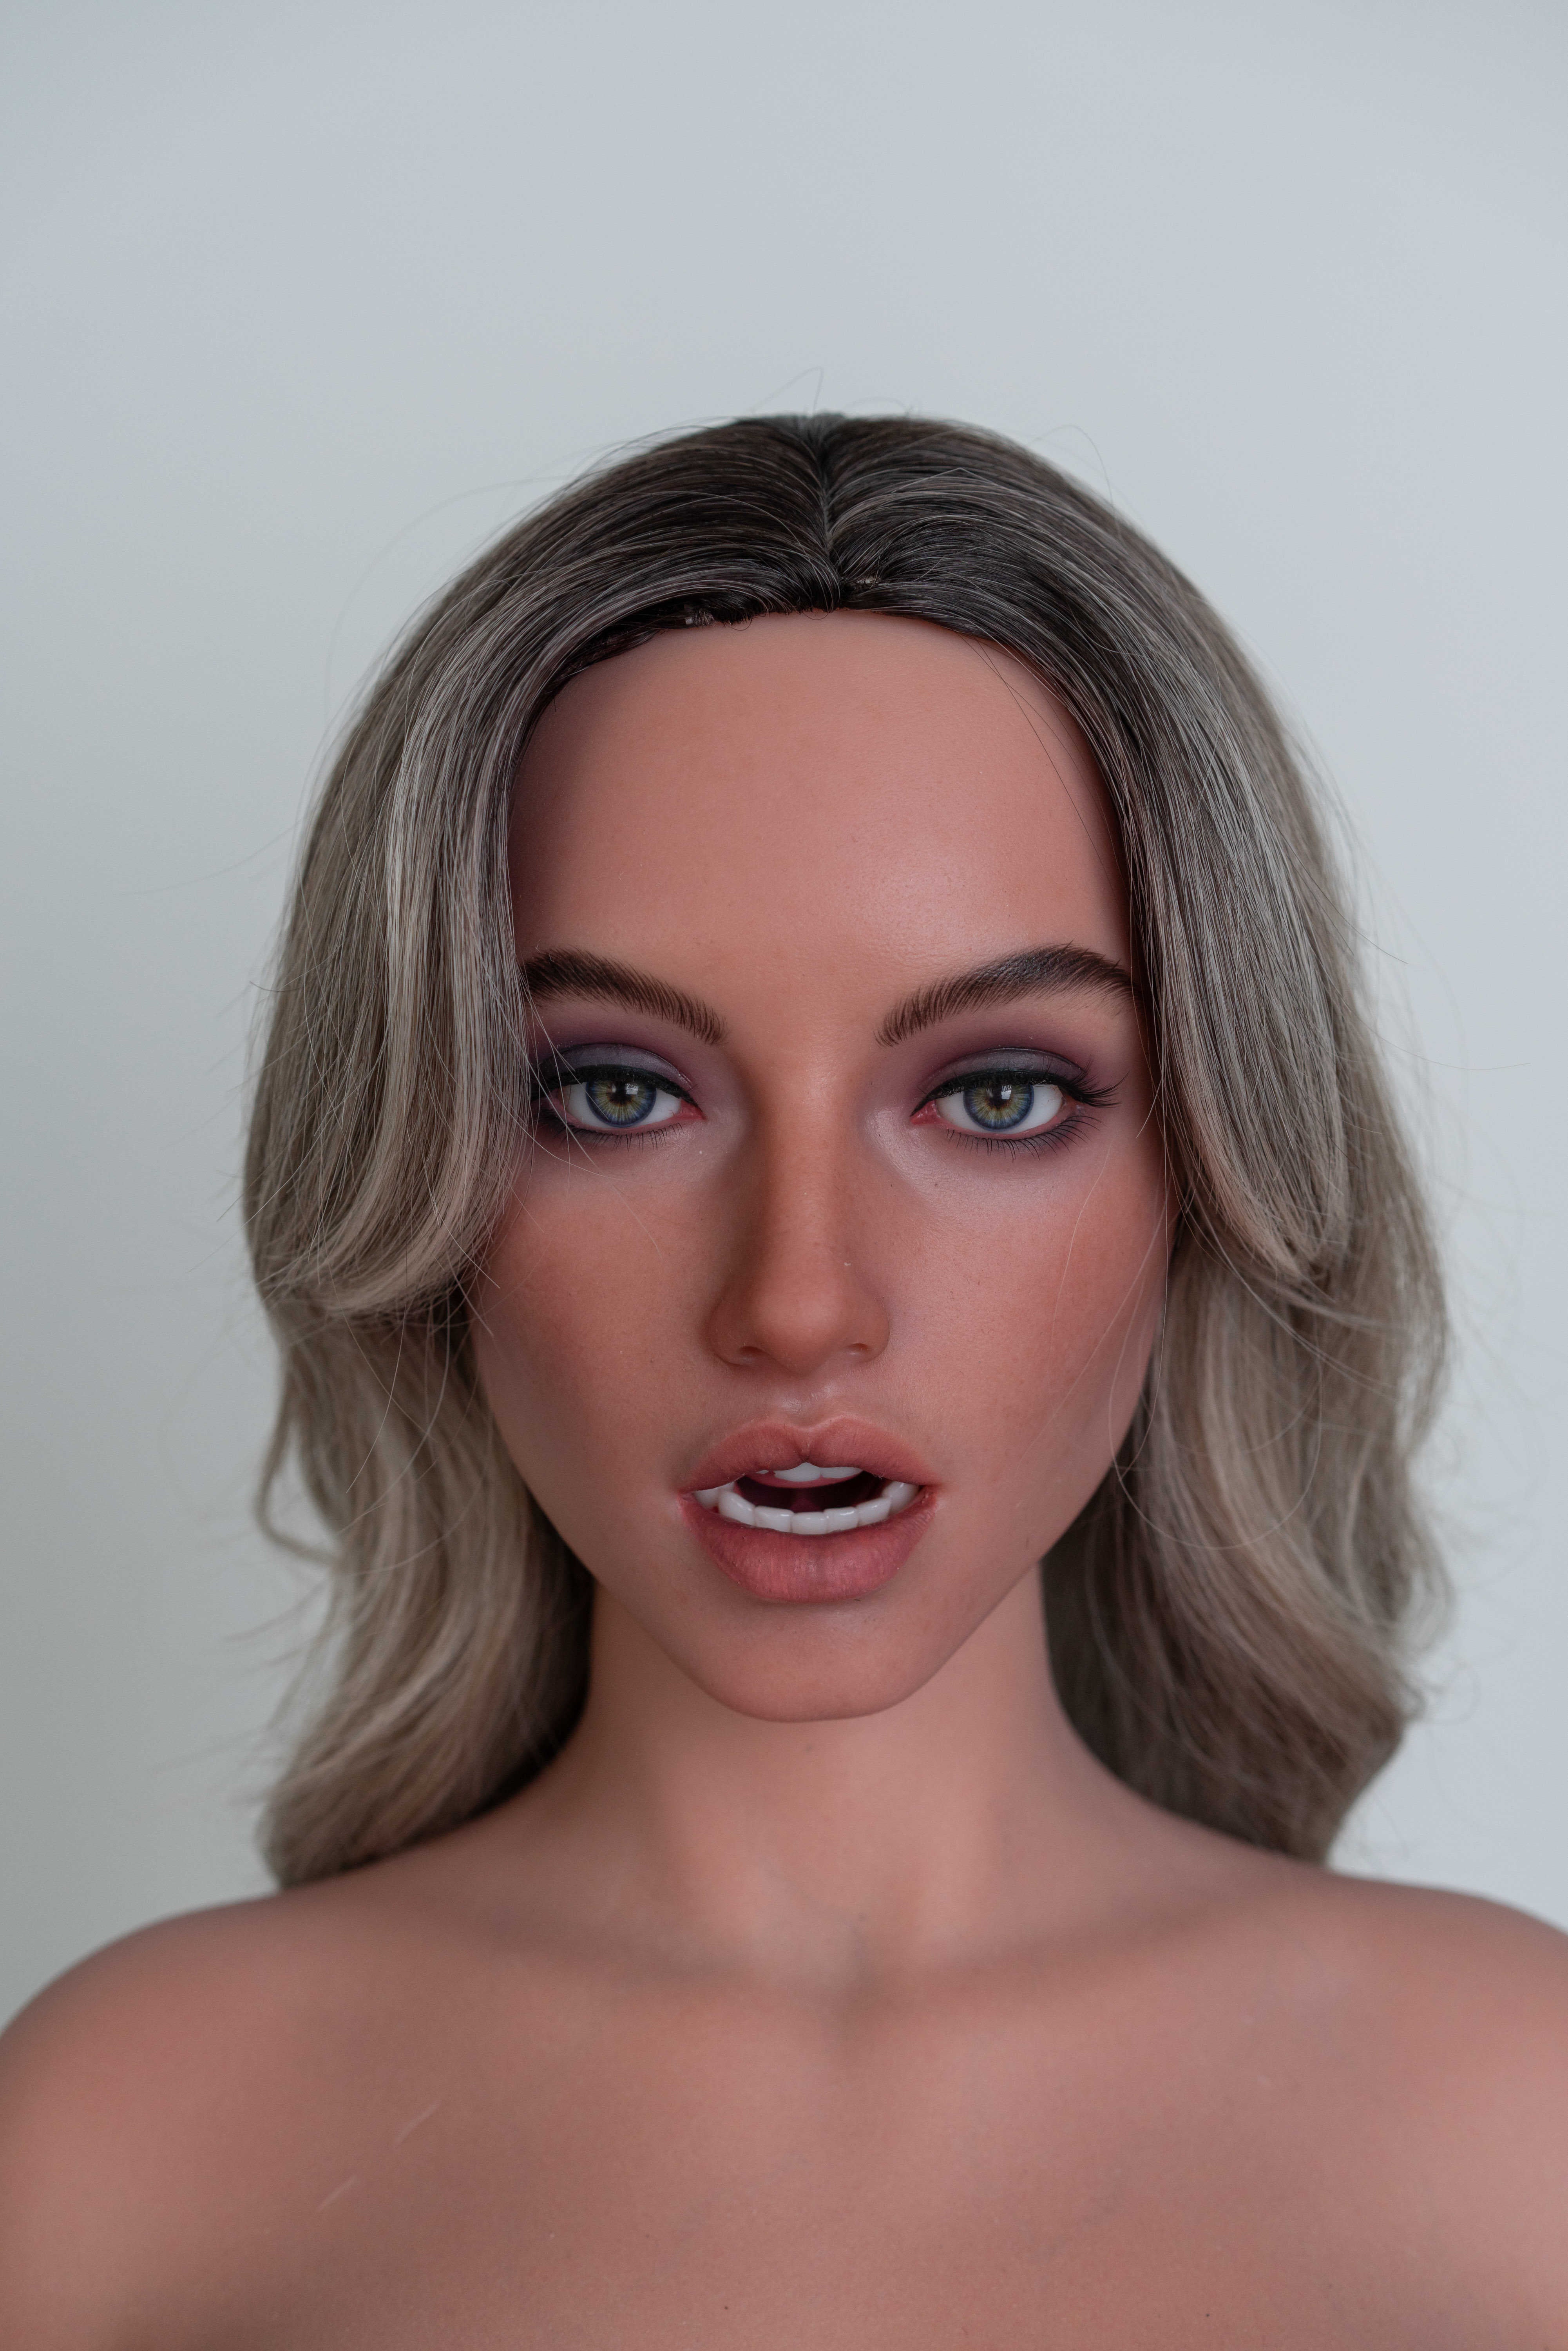 Zelex Doll SLE Series 164 cm G Silicone - ZXE216-1  Movable Jaw